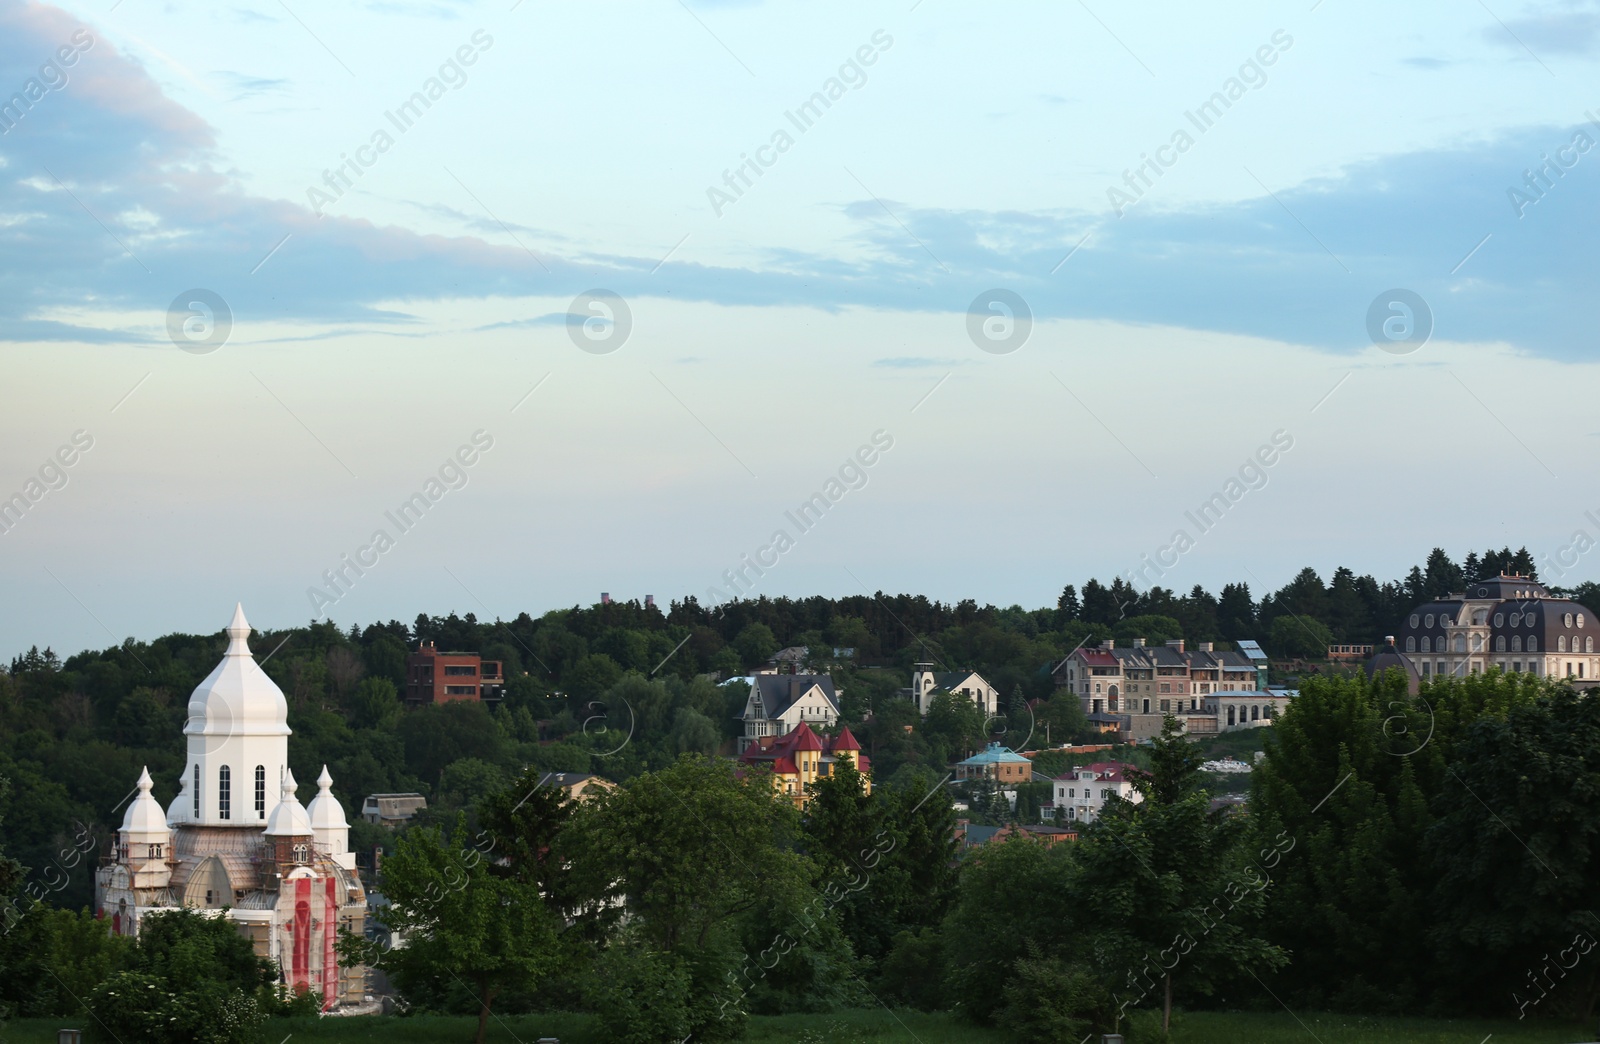 Photo of KYIV, UKRAINE - MAY 23, 2019: Christian church with domes at buildings among trees